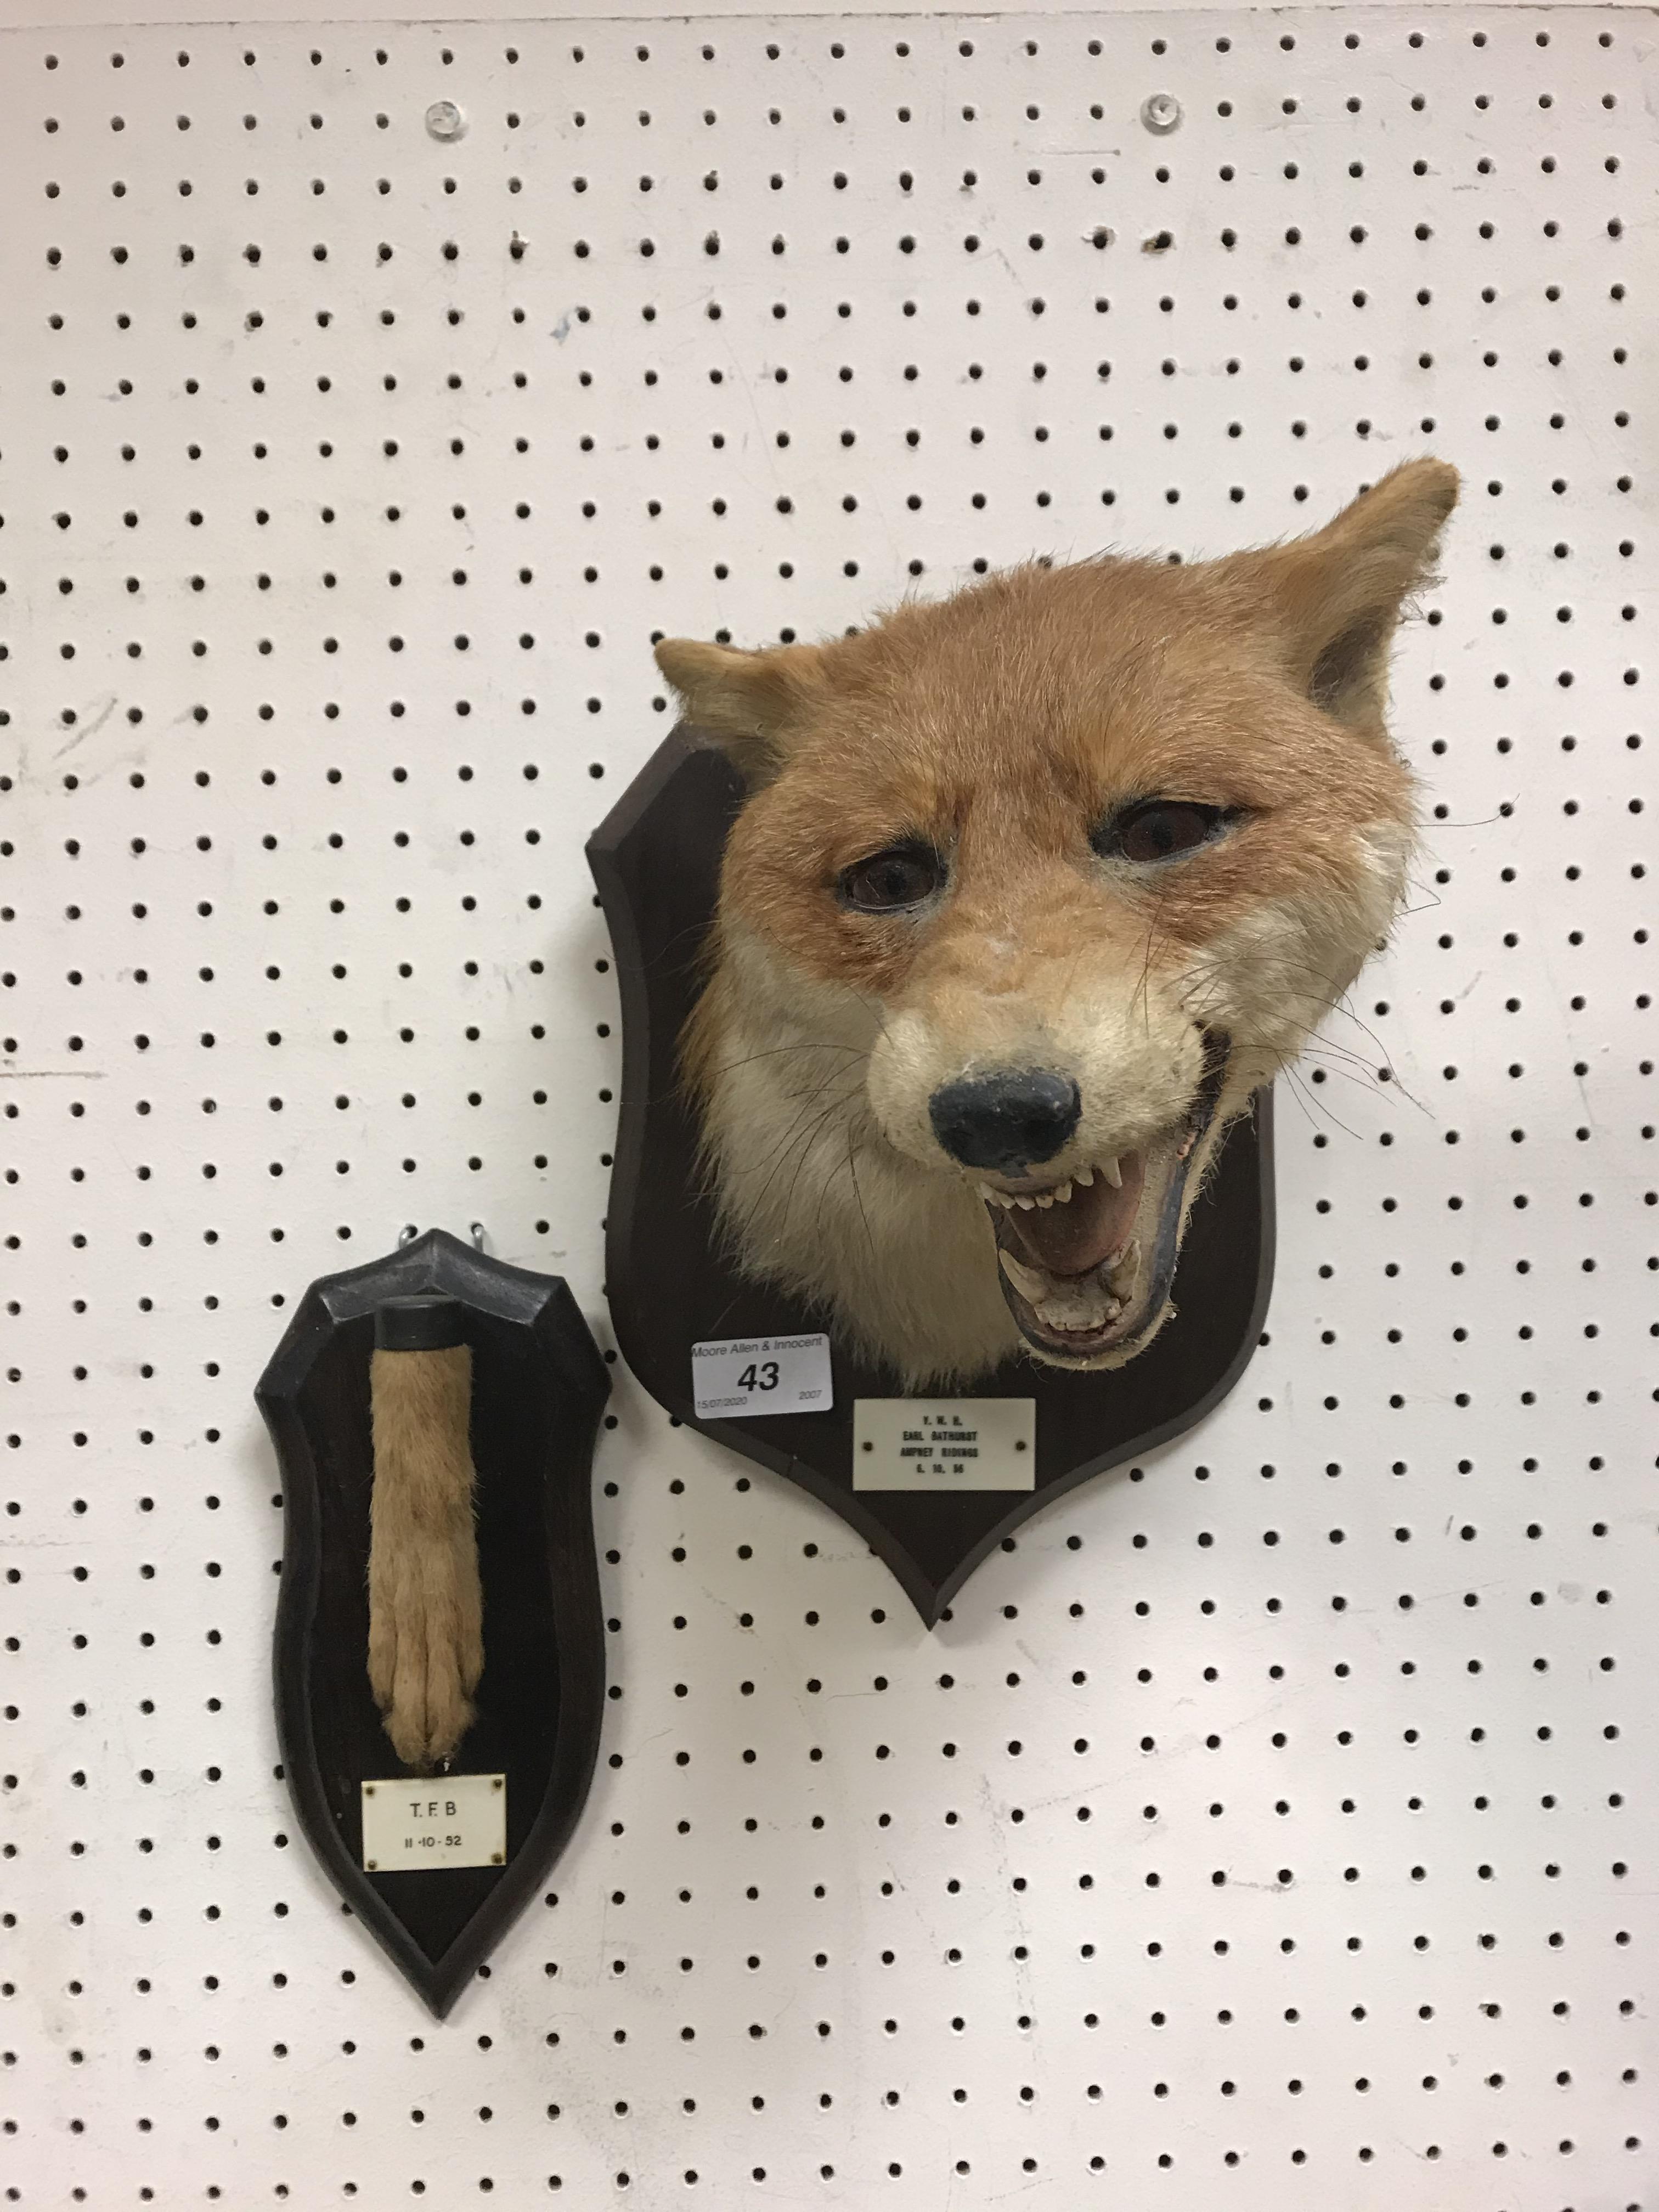 A taxidermy stuffed and mounted Fox mask in the manner of Peter Spicer,